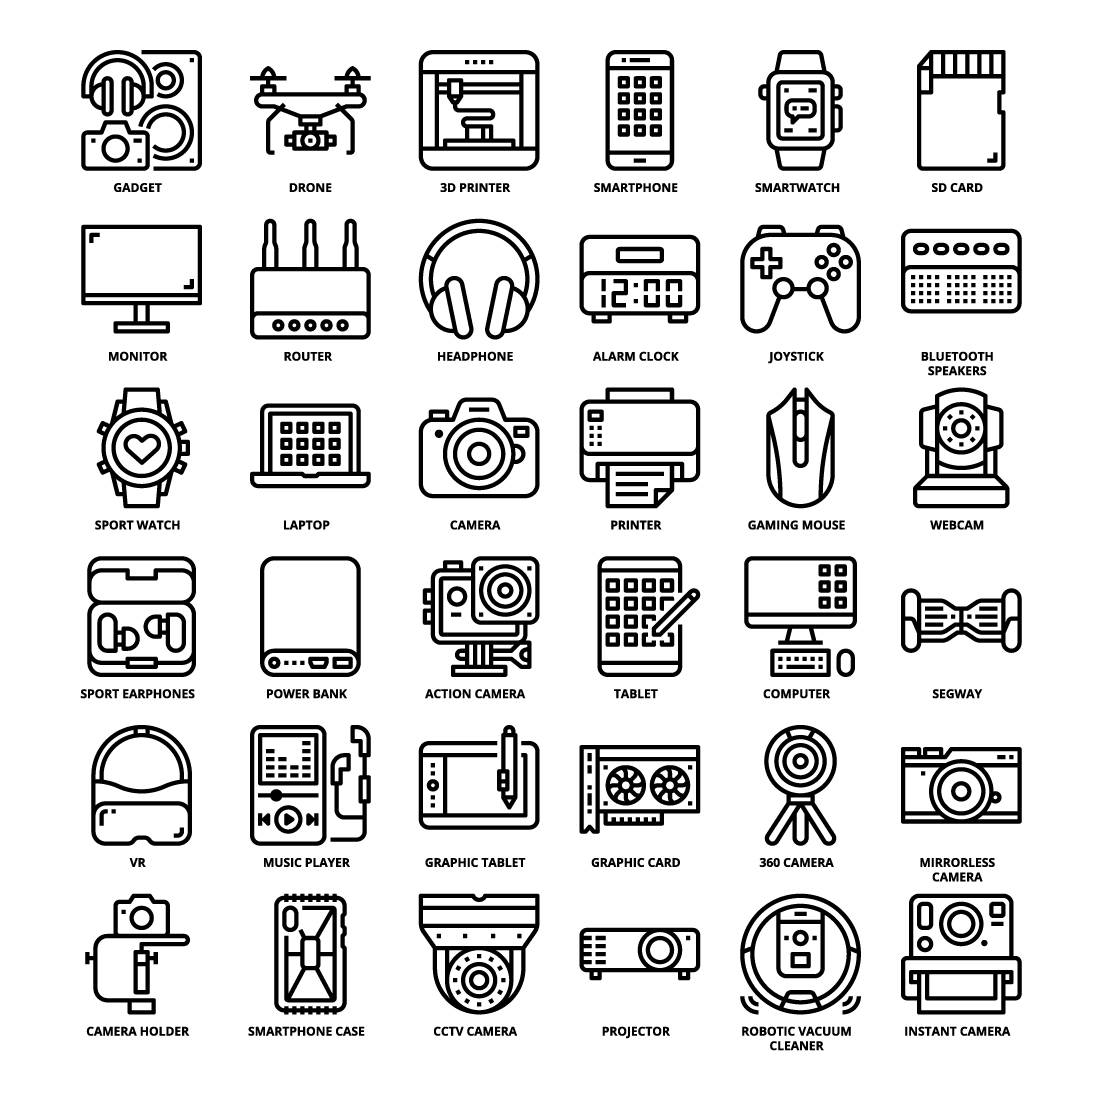 36 Gadget Icons Set x 4 Styles preview image.